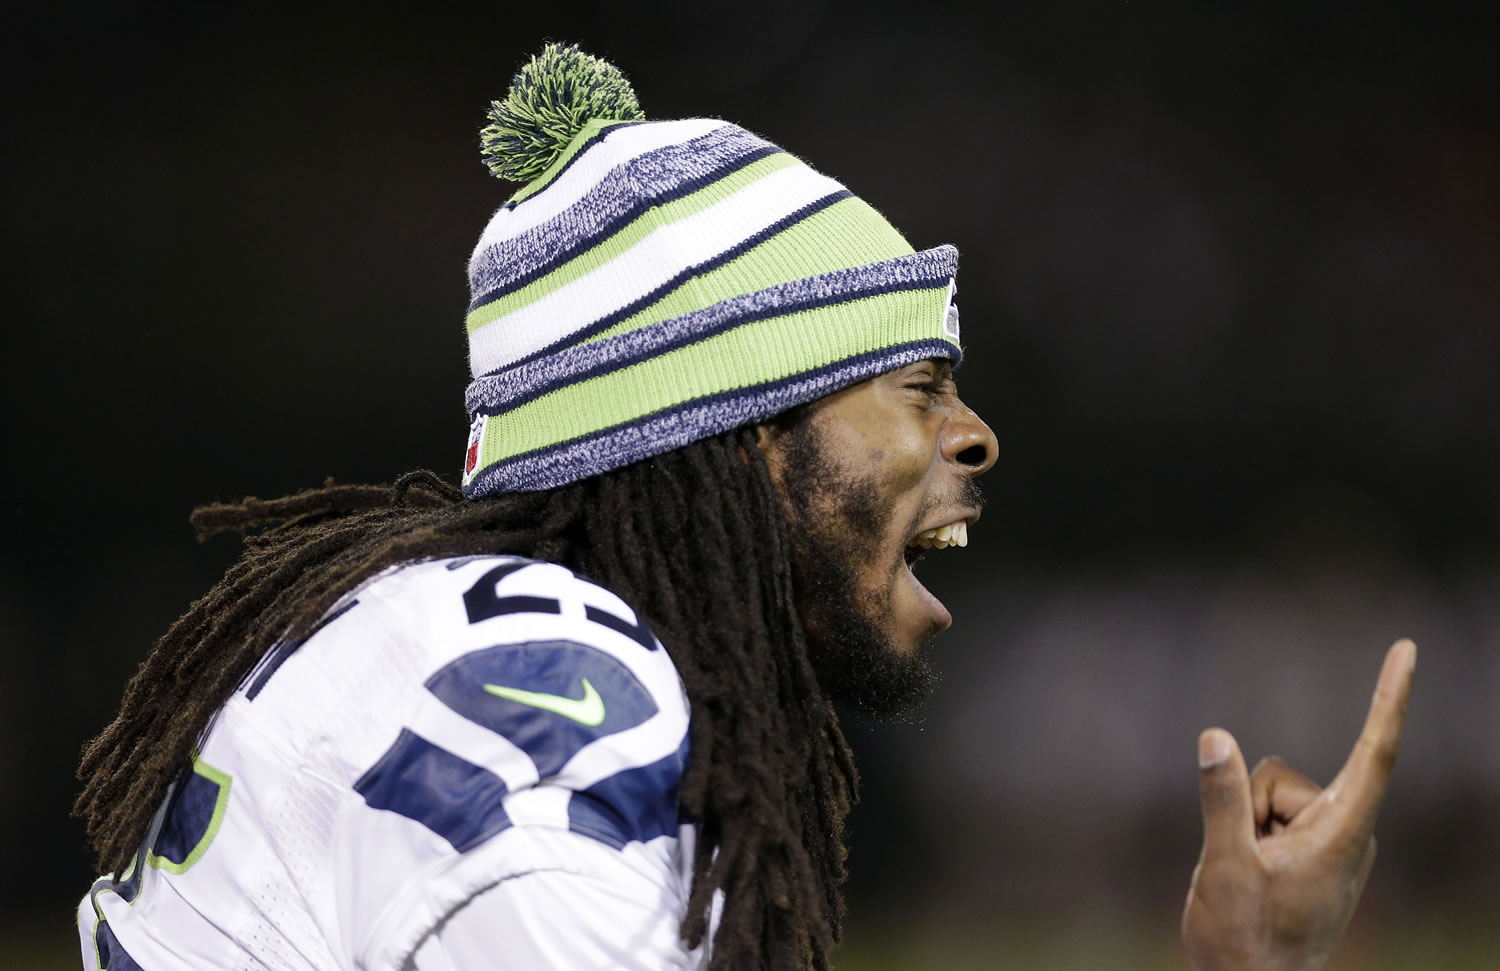 Seattle Seahawks cornerback Richard Sherman yells on the sideline during the second half of an NFL preseason football game against the Oakland Raiders in Oakland, Calif.